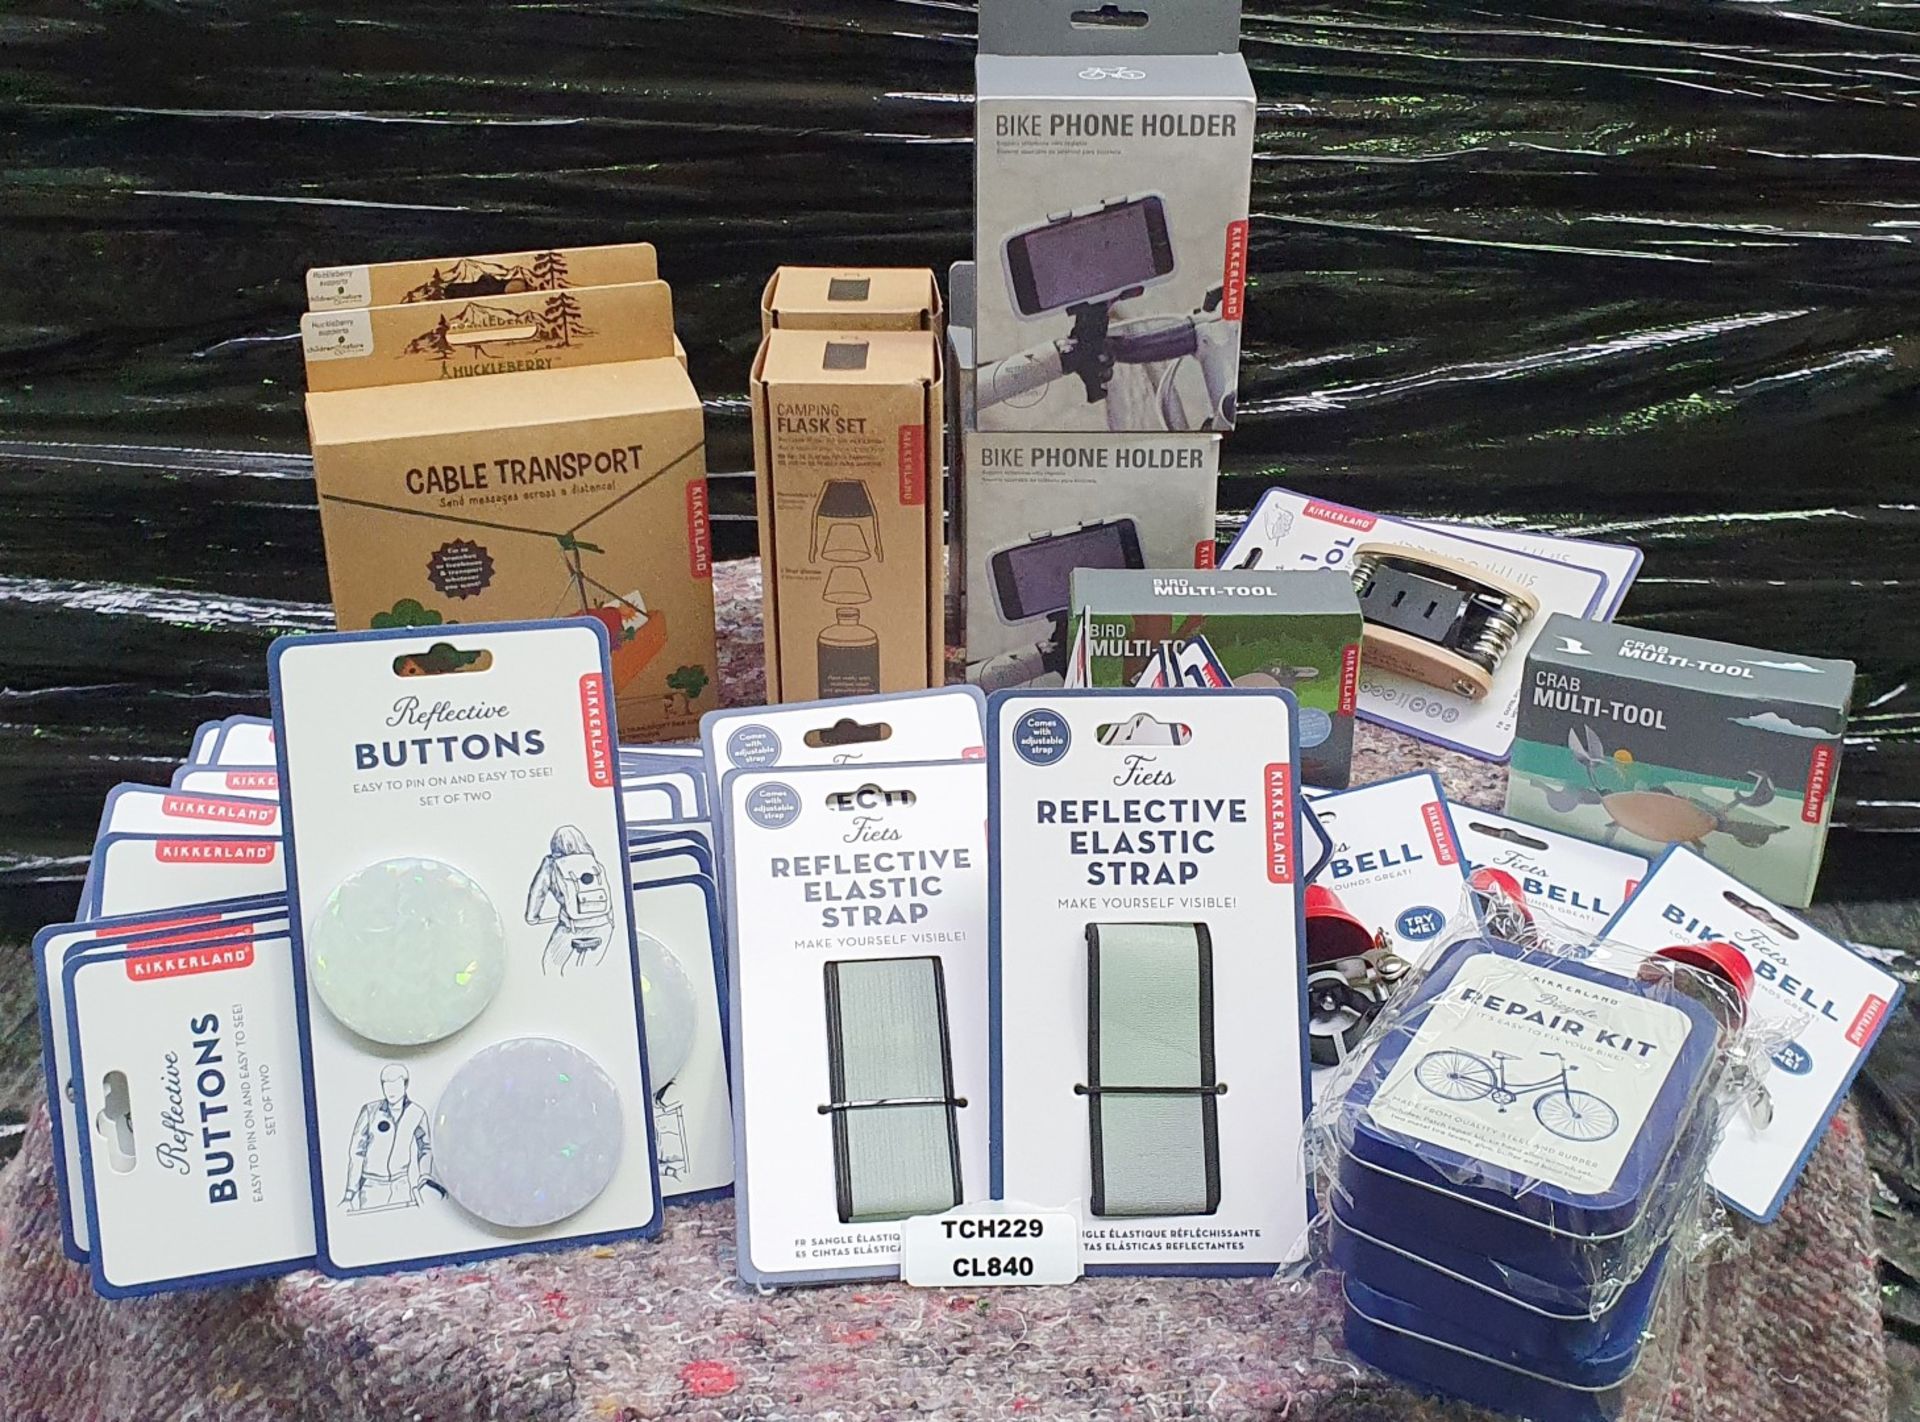 37 x Assorted Outdoor / Bicycle Products Including Camping Flask Sets, Cable Transport Kits,